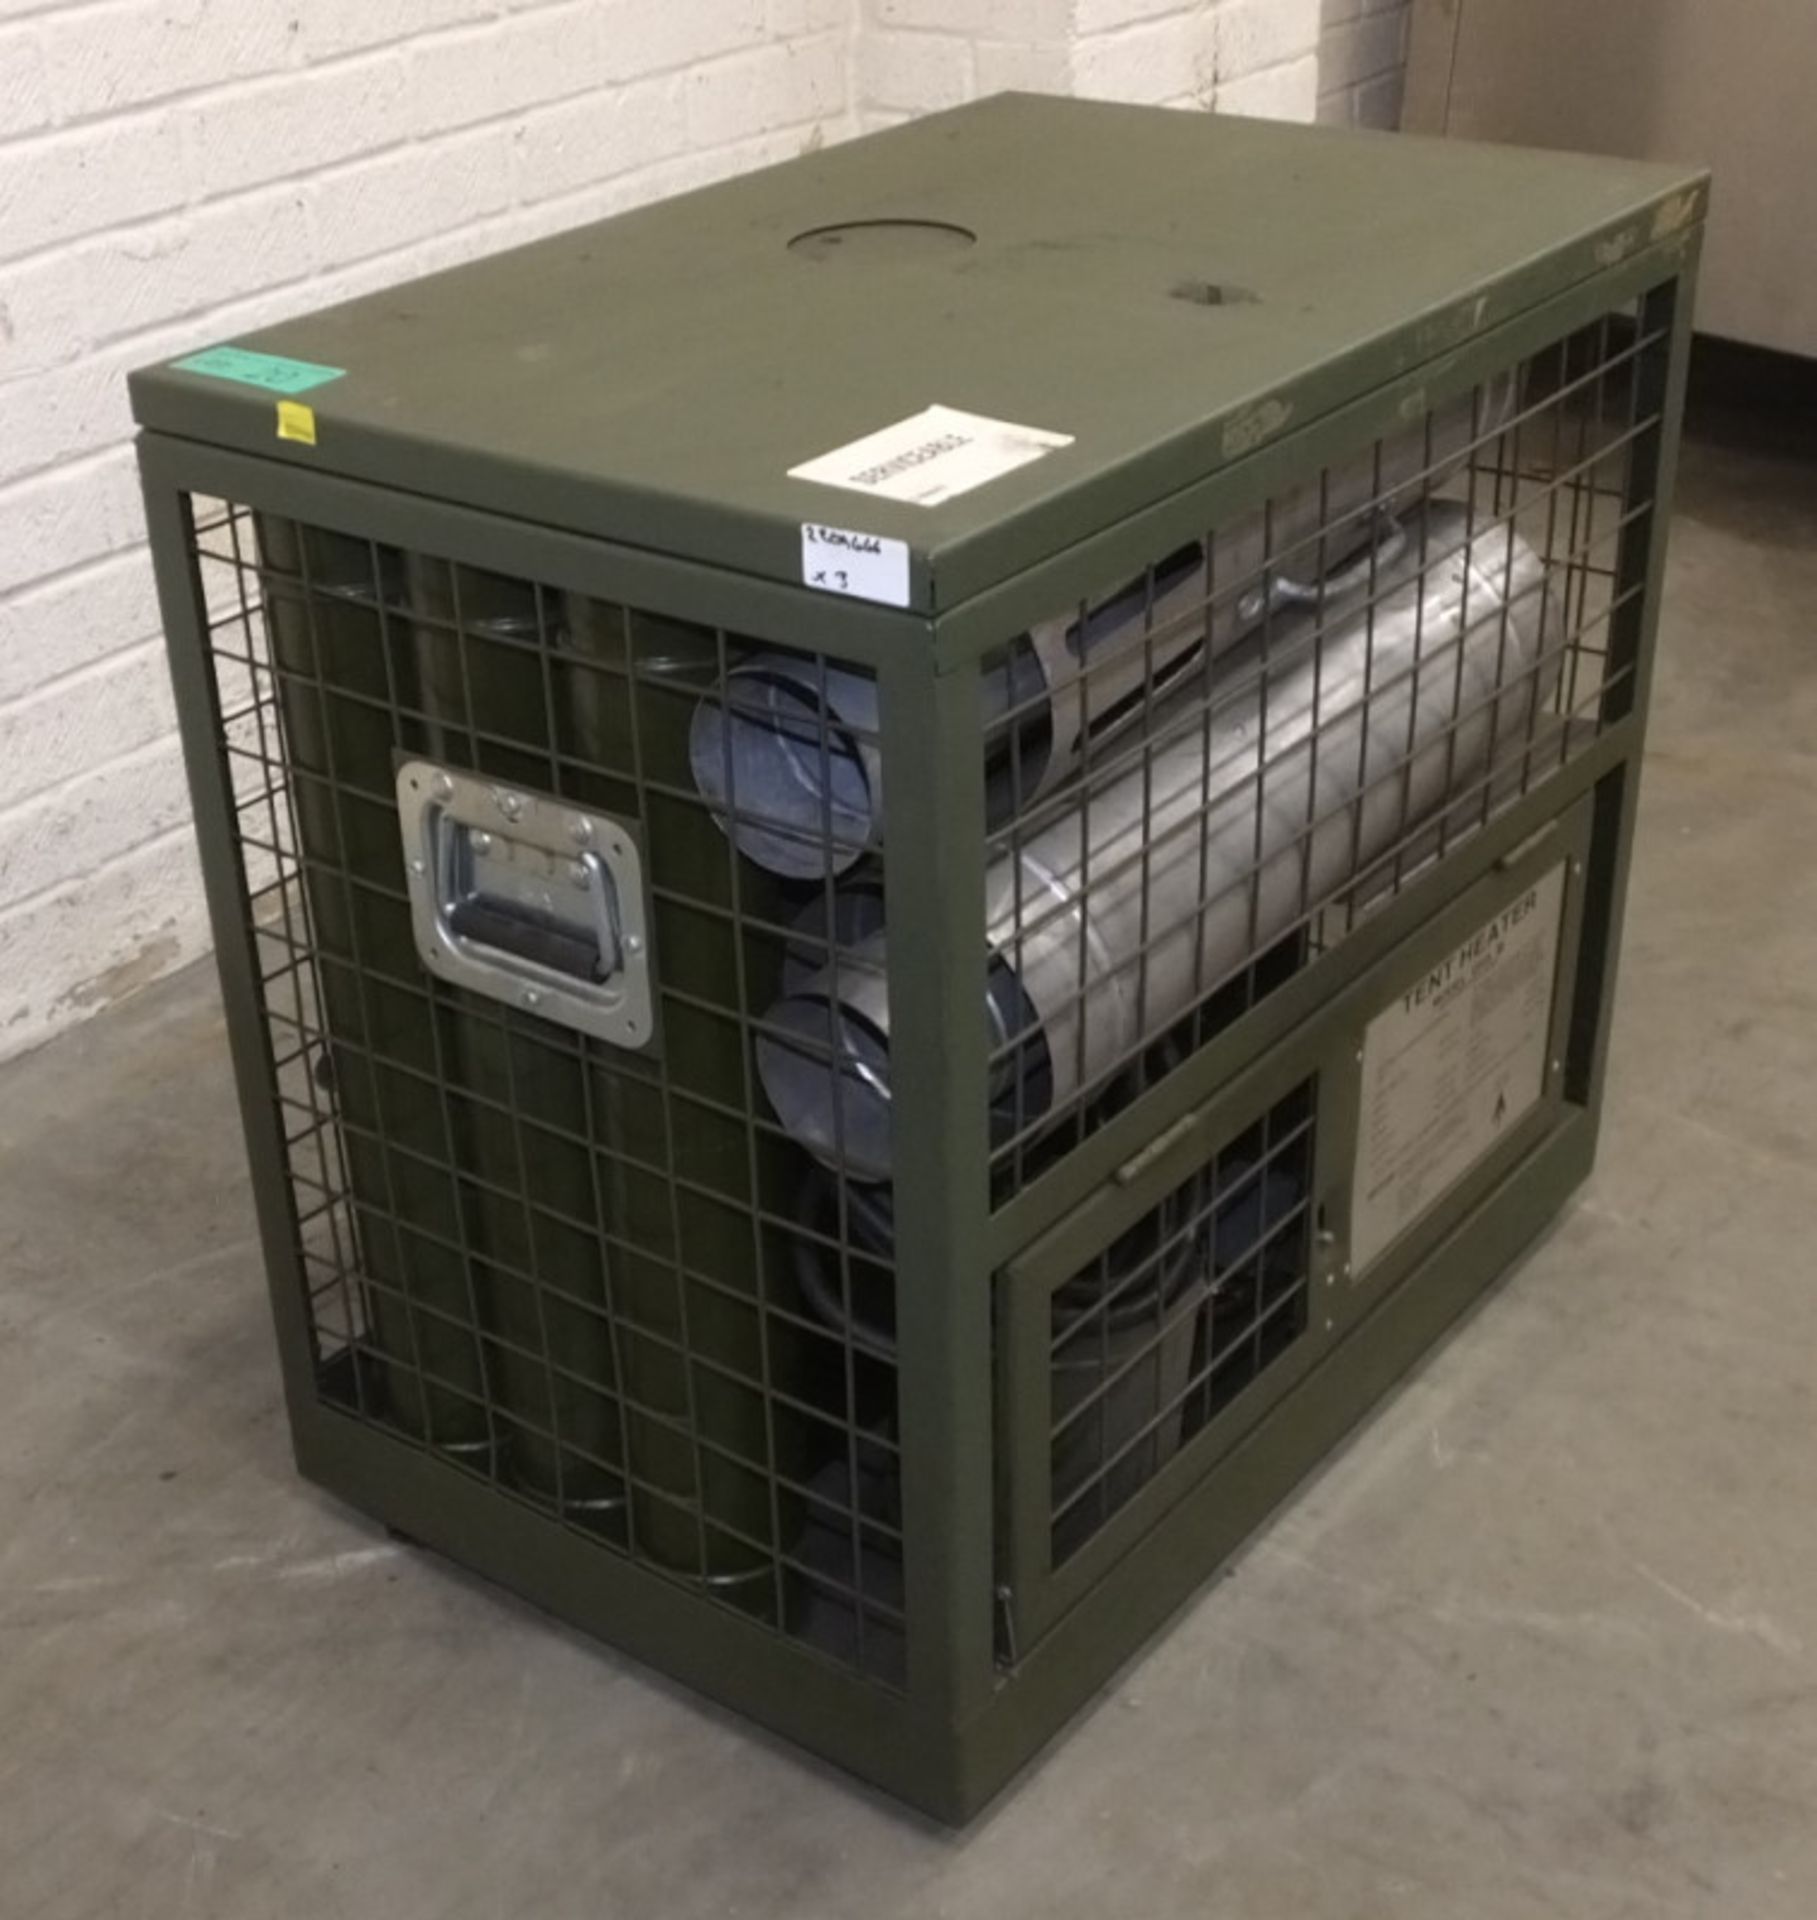 HotBox Heaters Tent Heater GHS III - NSN 4520-99-130-6045 Output - 5-15kW, Ex-MOD specific - Image 11 of 11